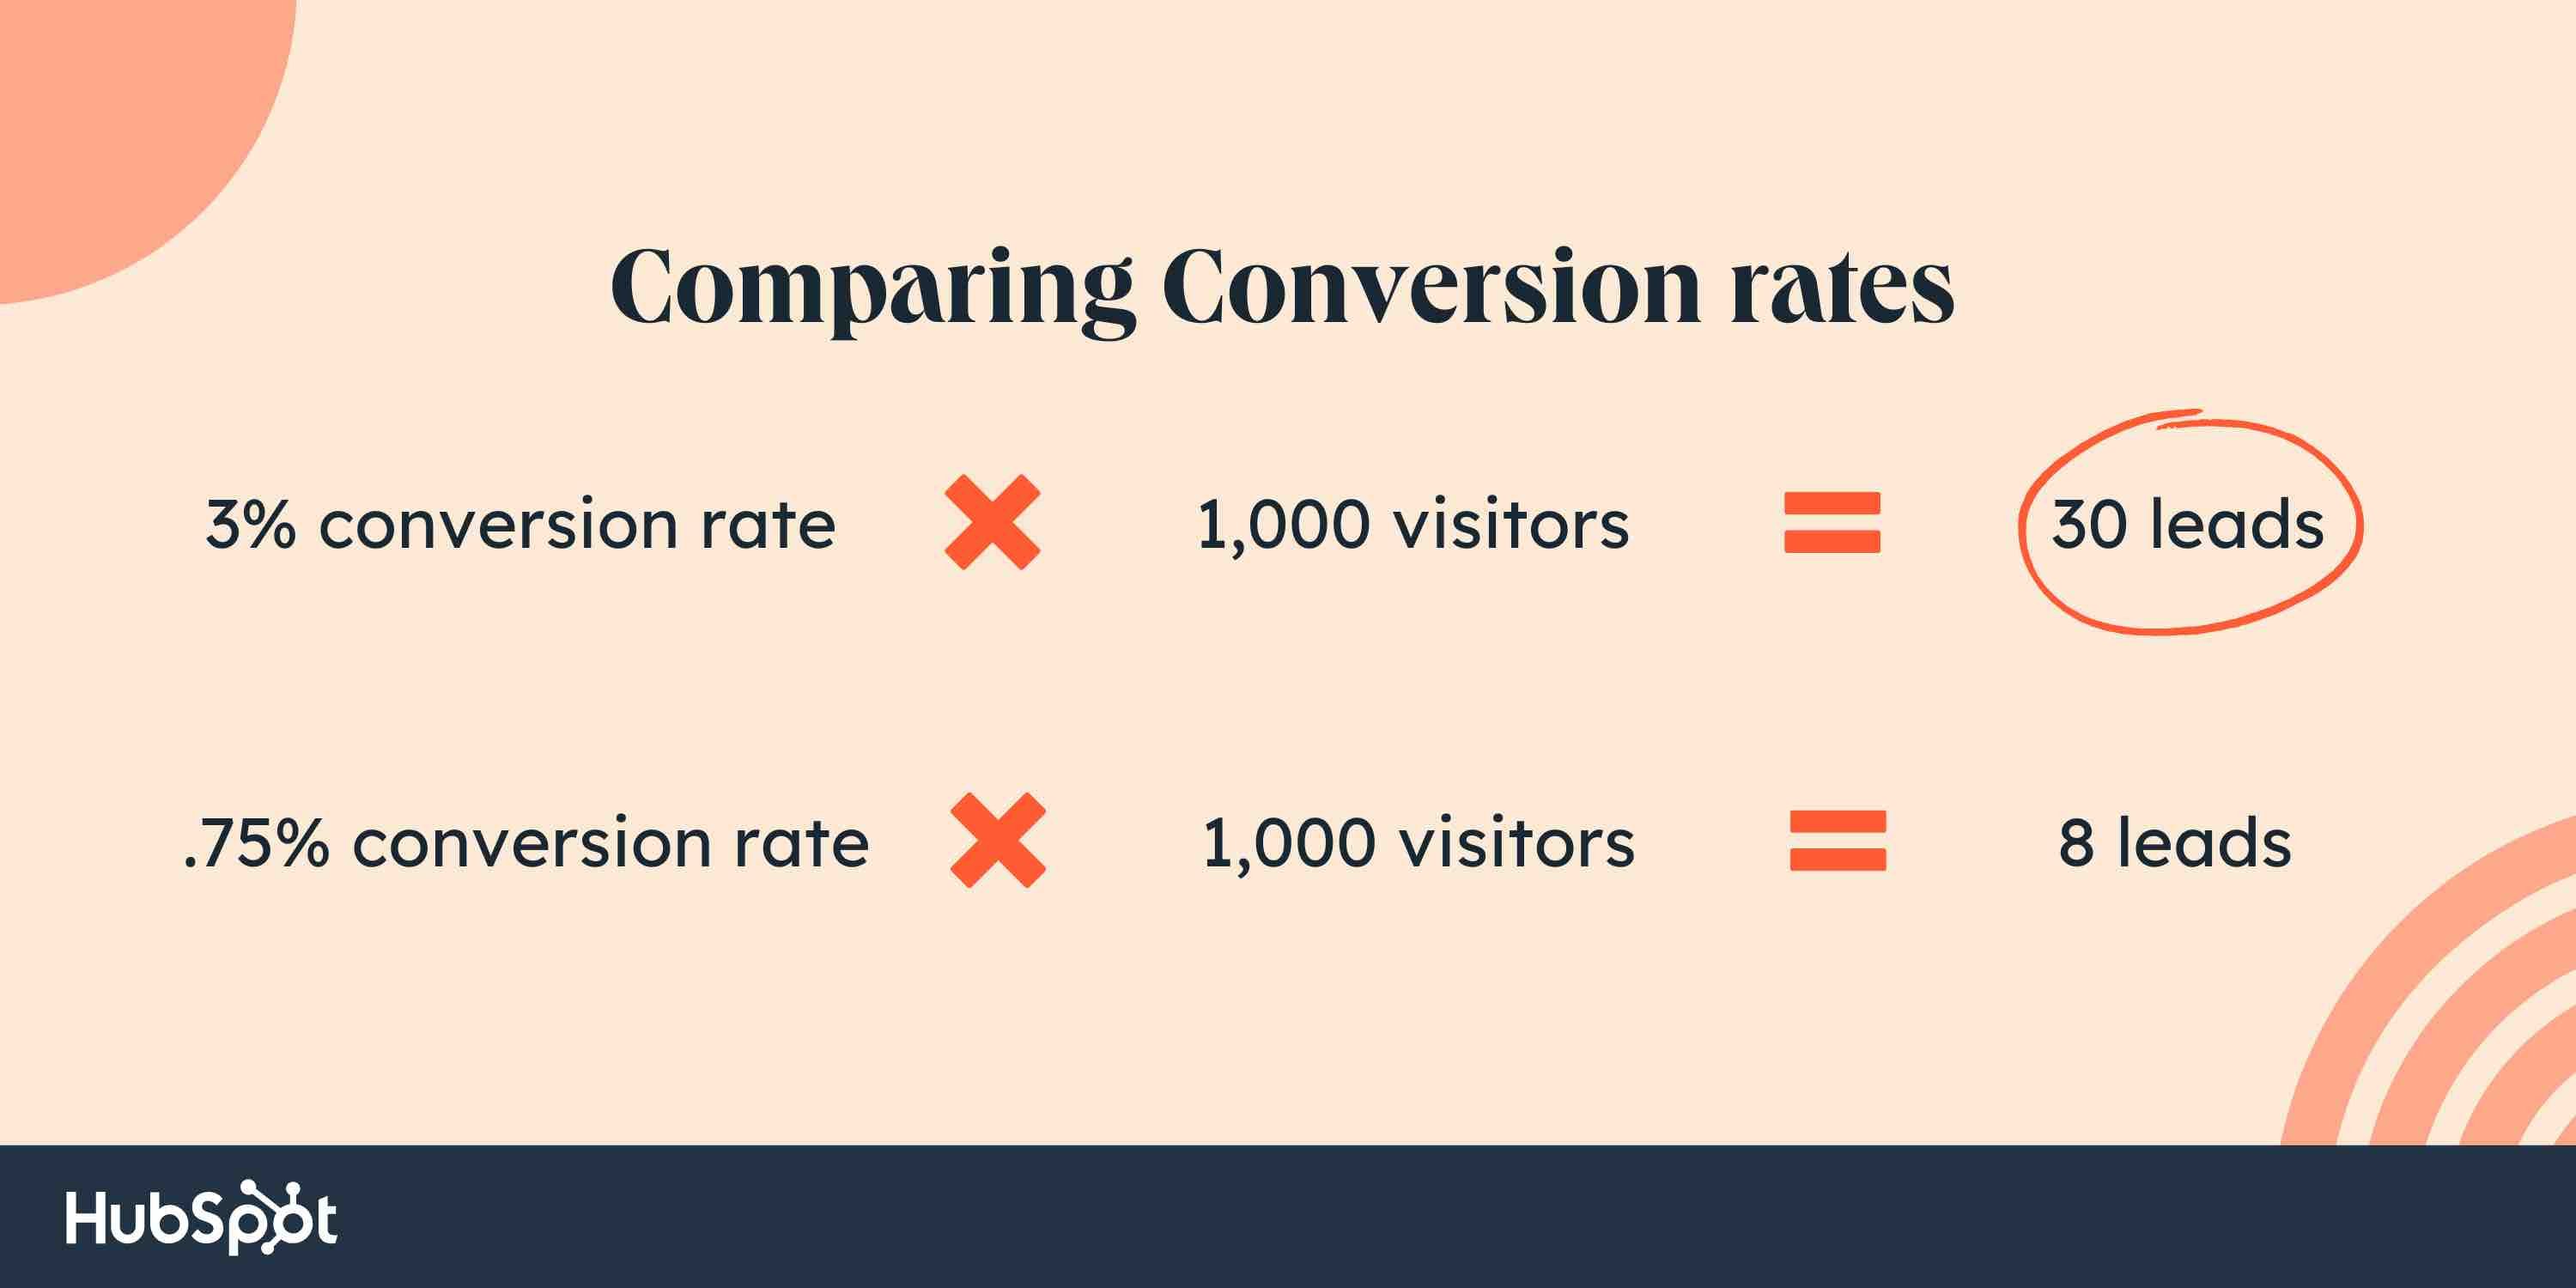 Newsletter sign-up form examples, Conversion rate comparisons